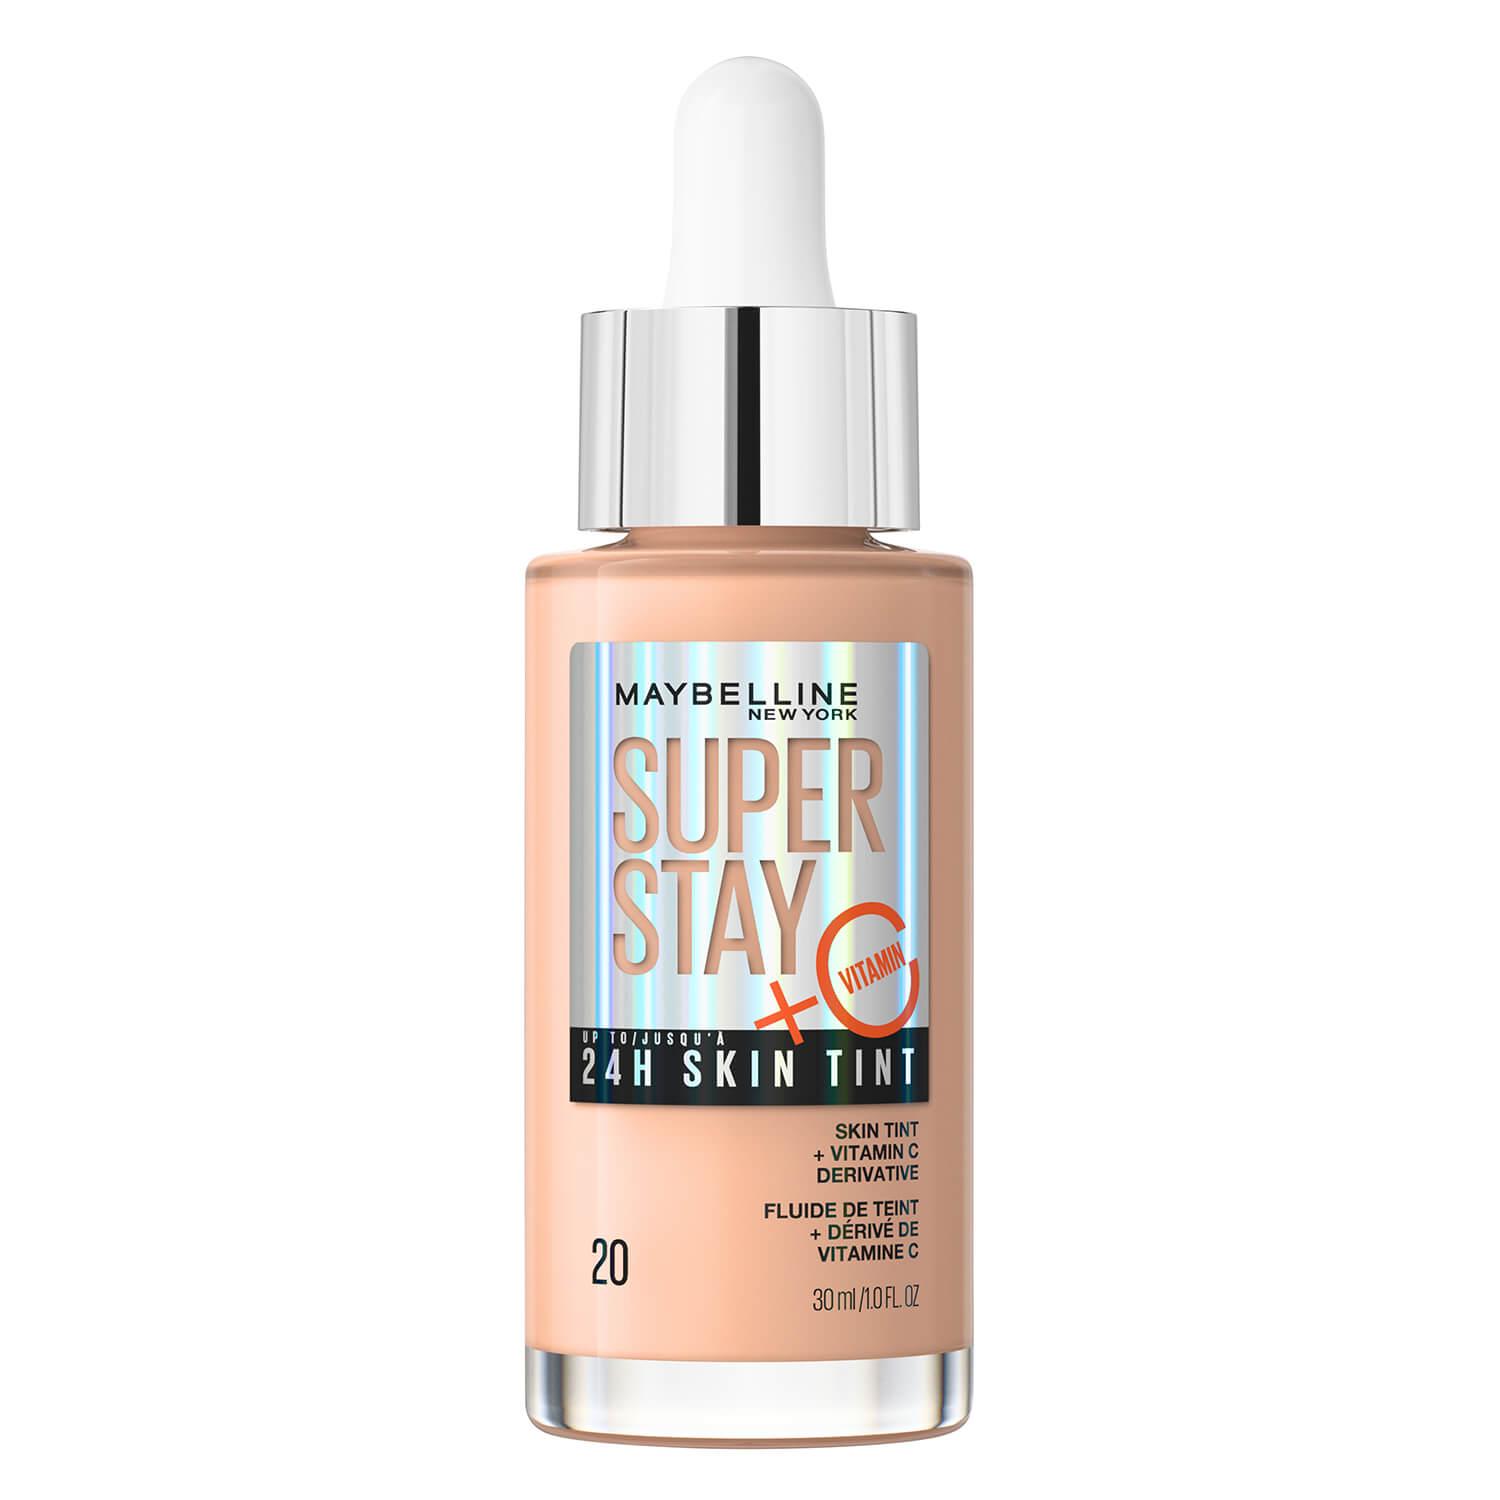 Maybelline NY Teint - Super Stay 24H Skin Tint Cameo 20